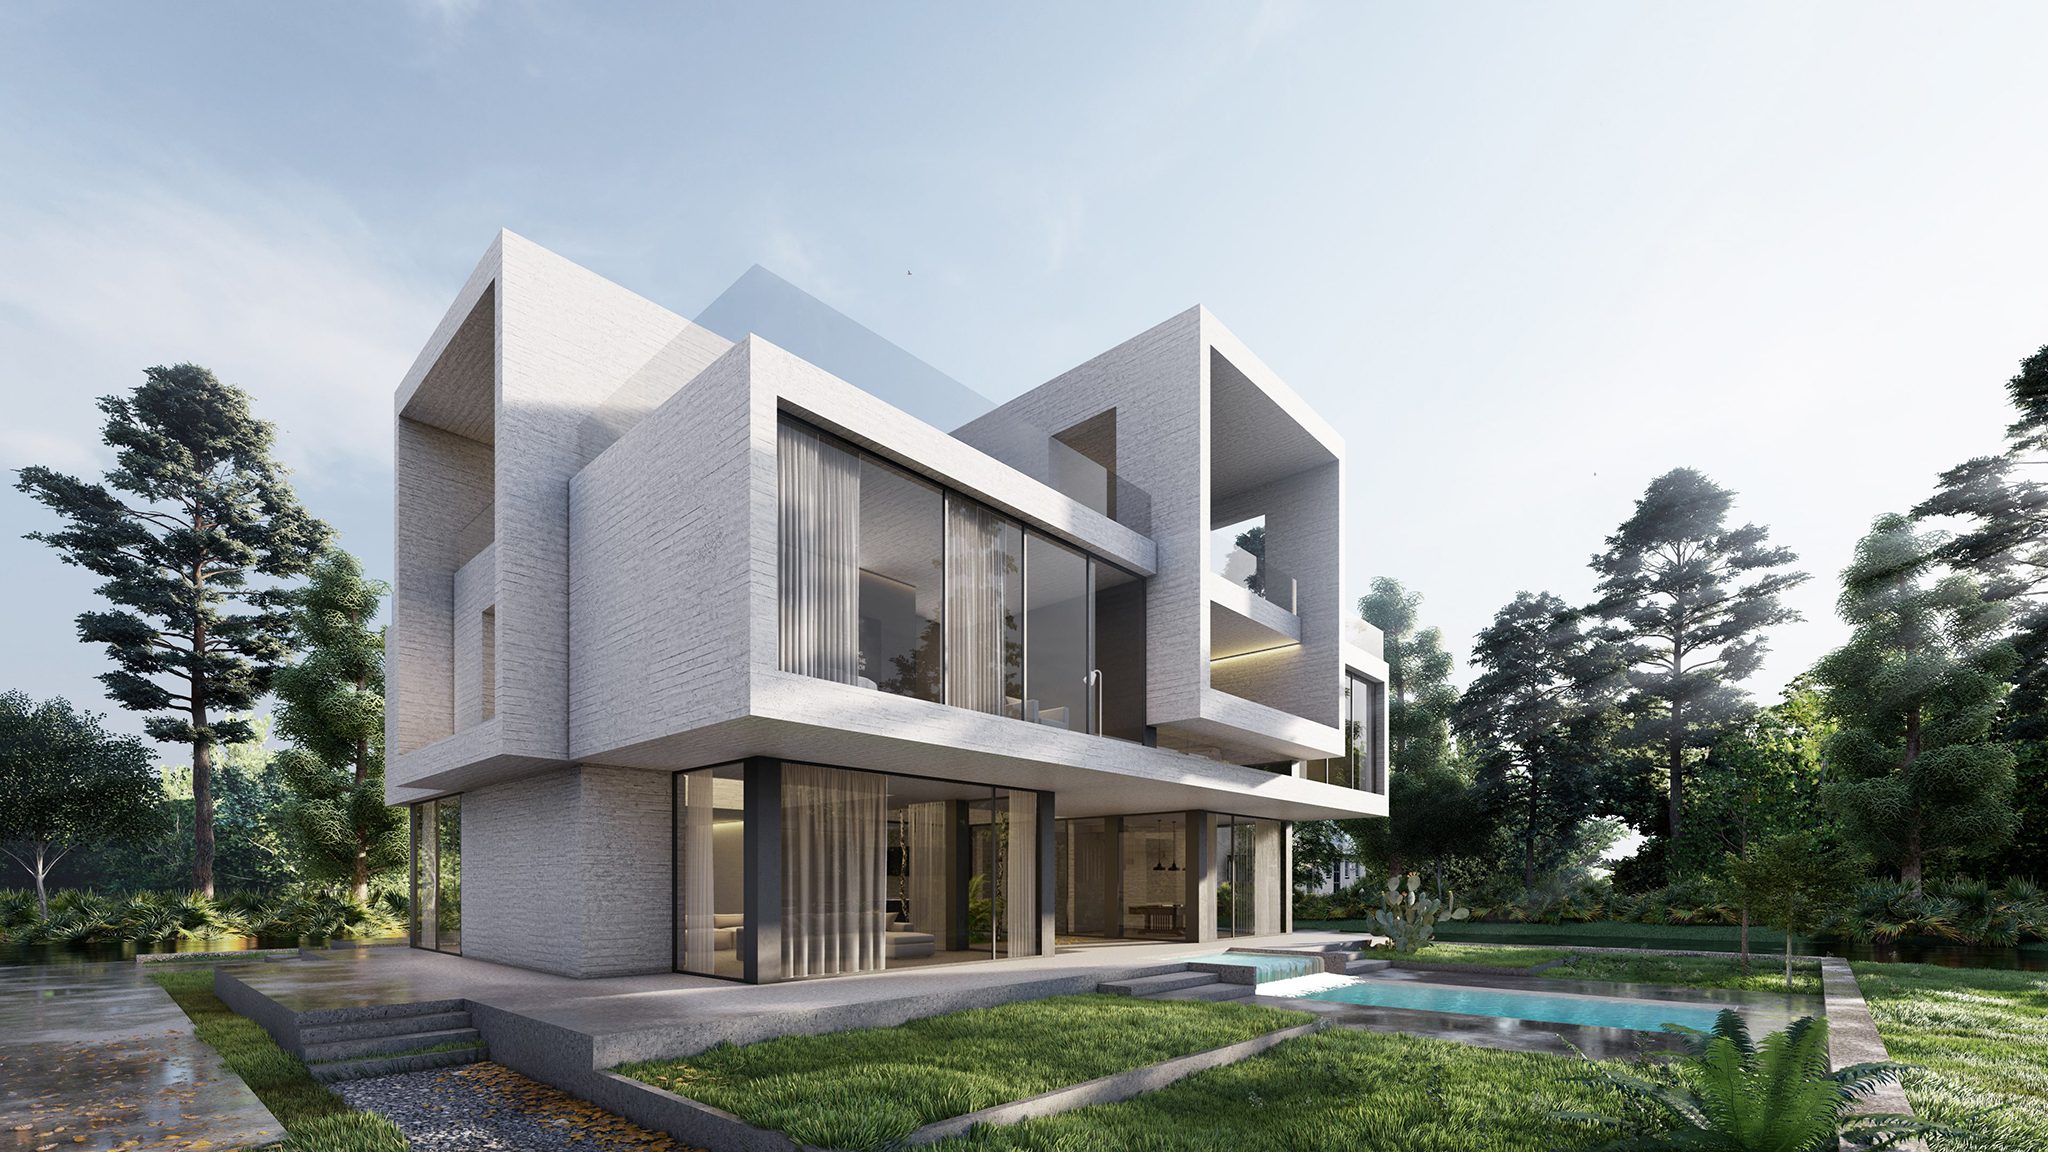 Exterior perspective rendering of a modern 2+ storey concrete house; day mode angular backyard view.